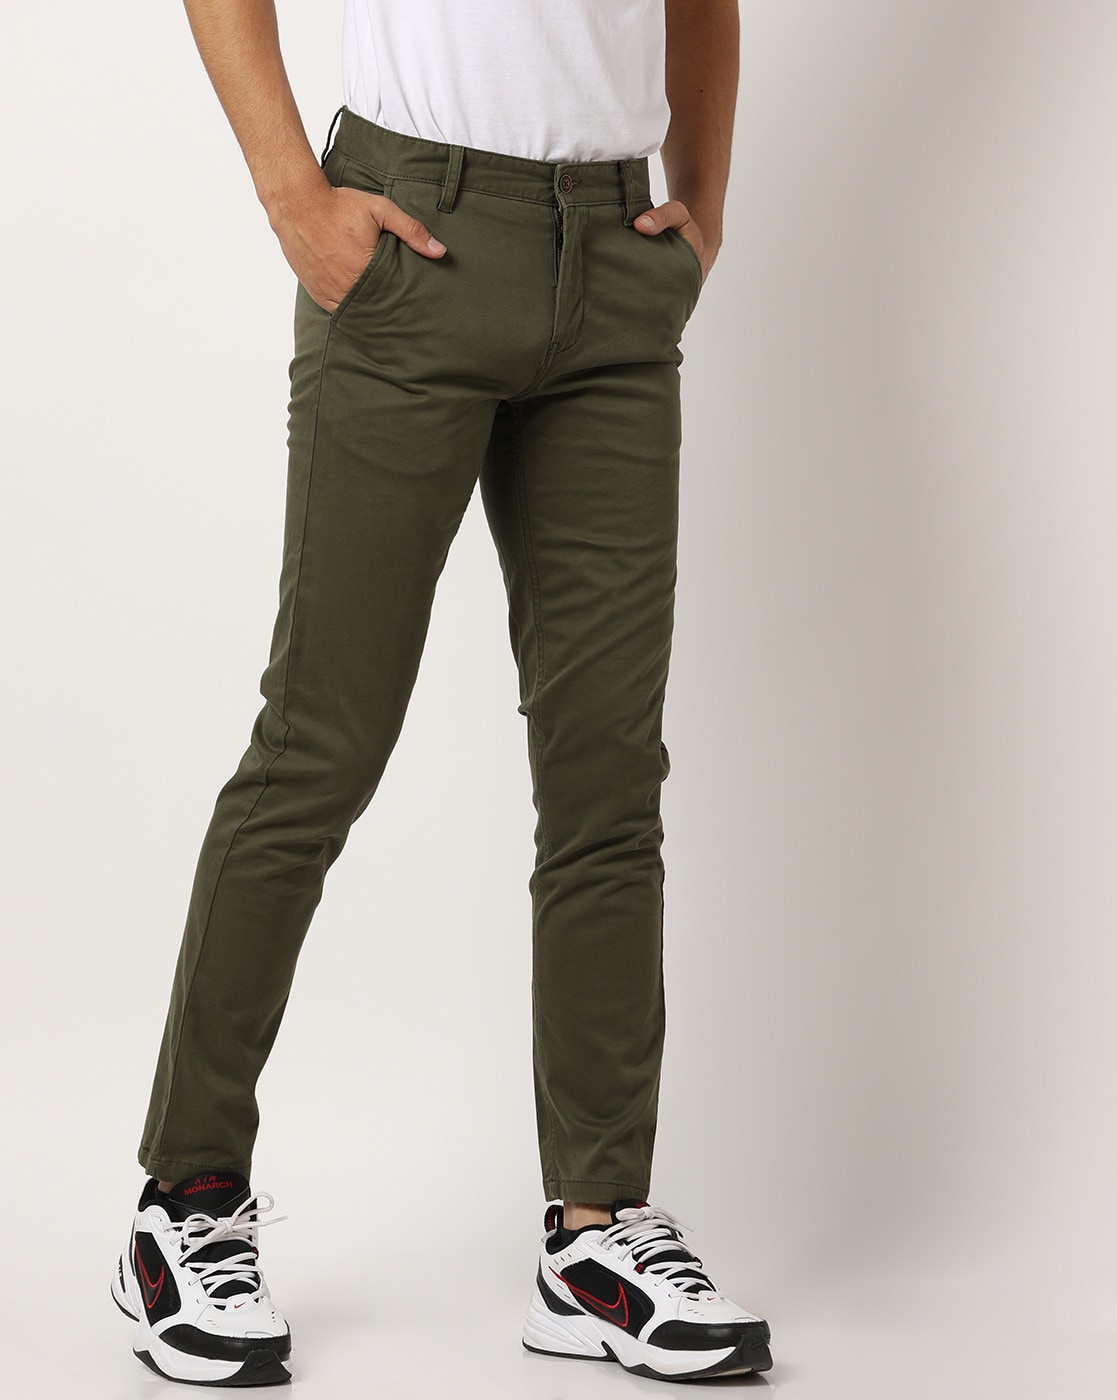 Buy Grey Trousers  Pants for Men by ALTHEORY Online  Ajiocom